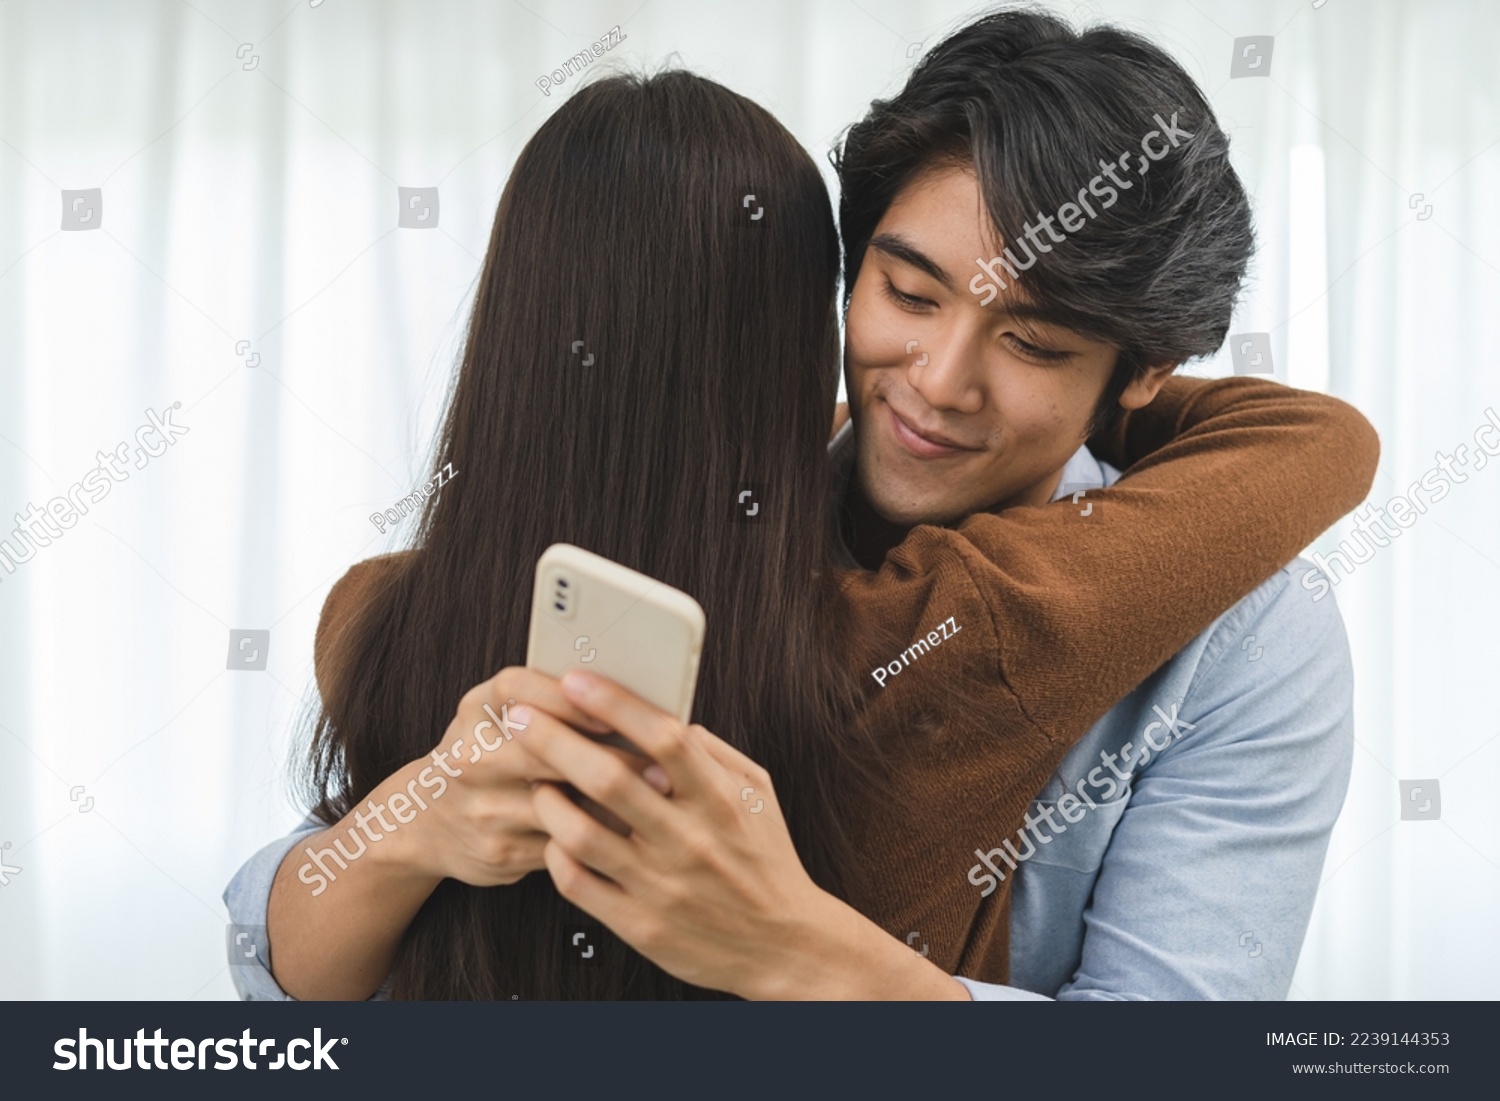 Cheating on girlfriends concept, unfaithful Asian man looking at mobile phone text during embracing with his lover #2239144353